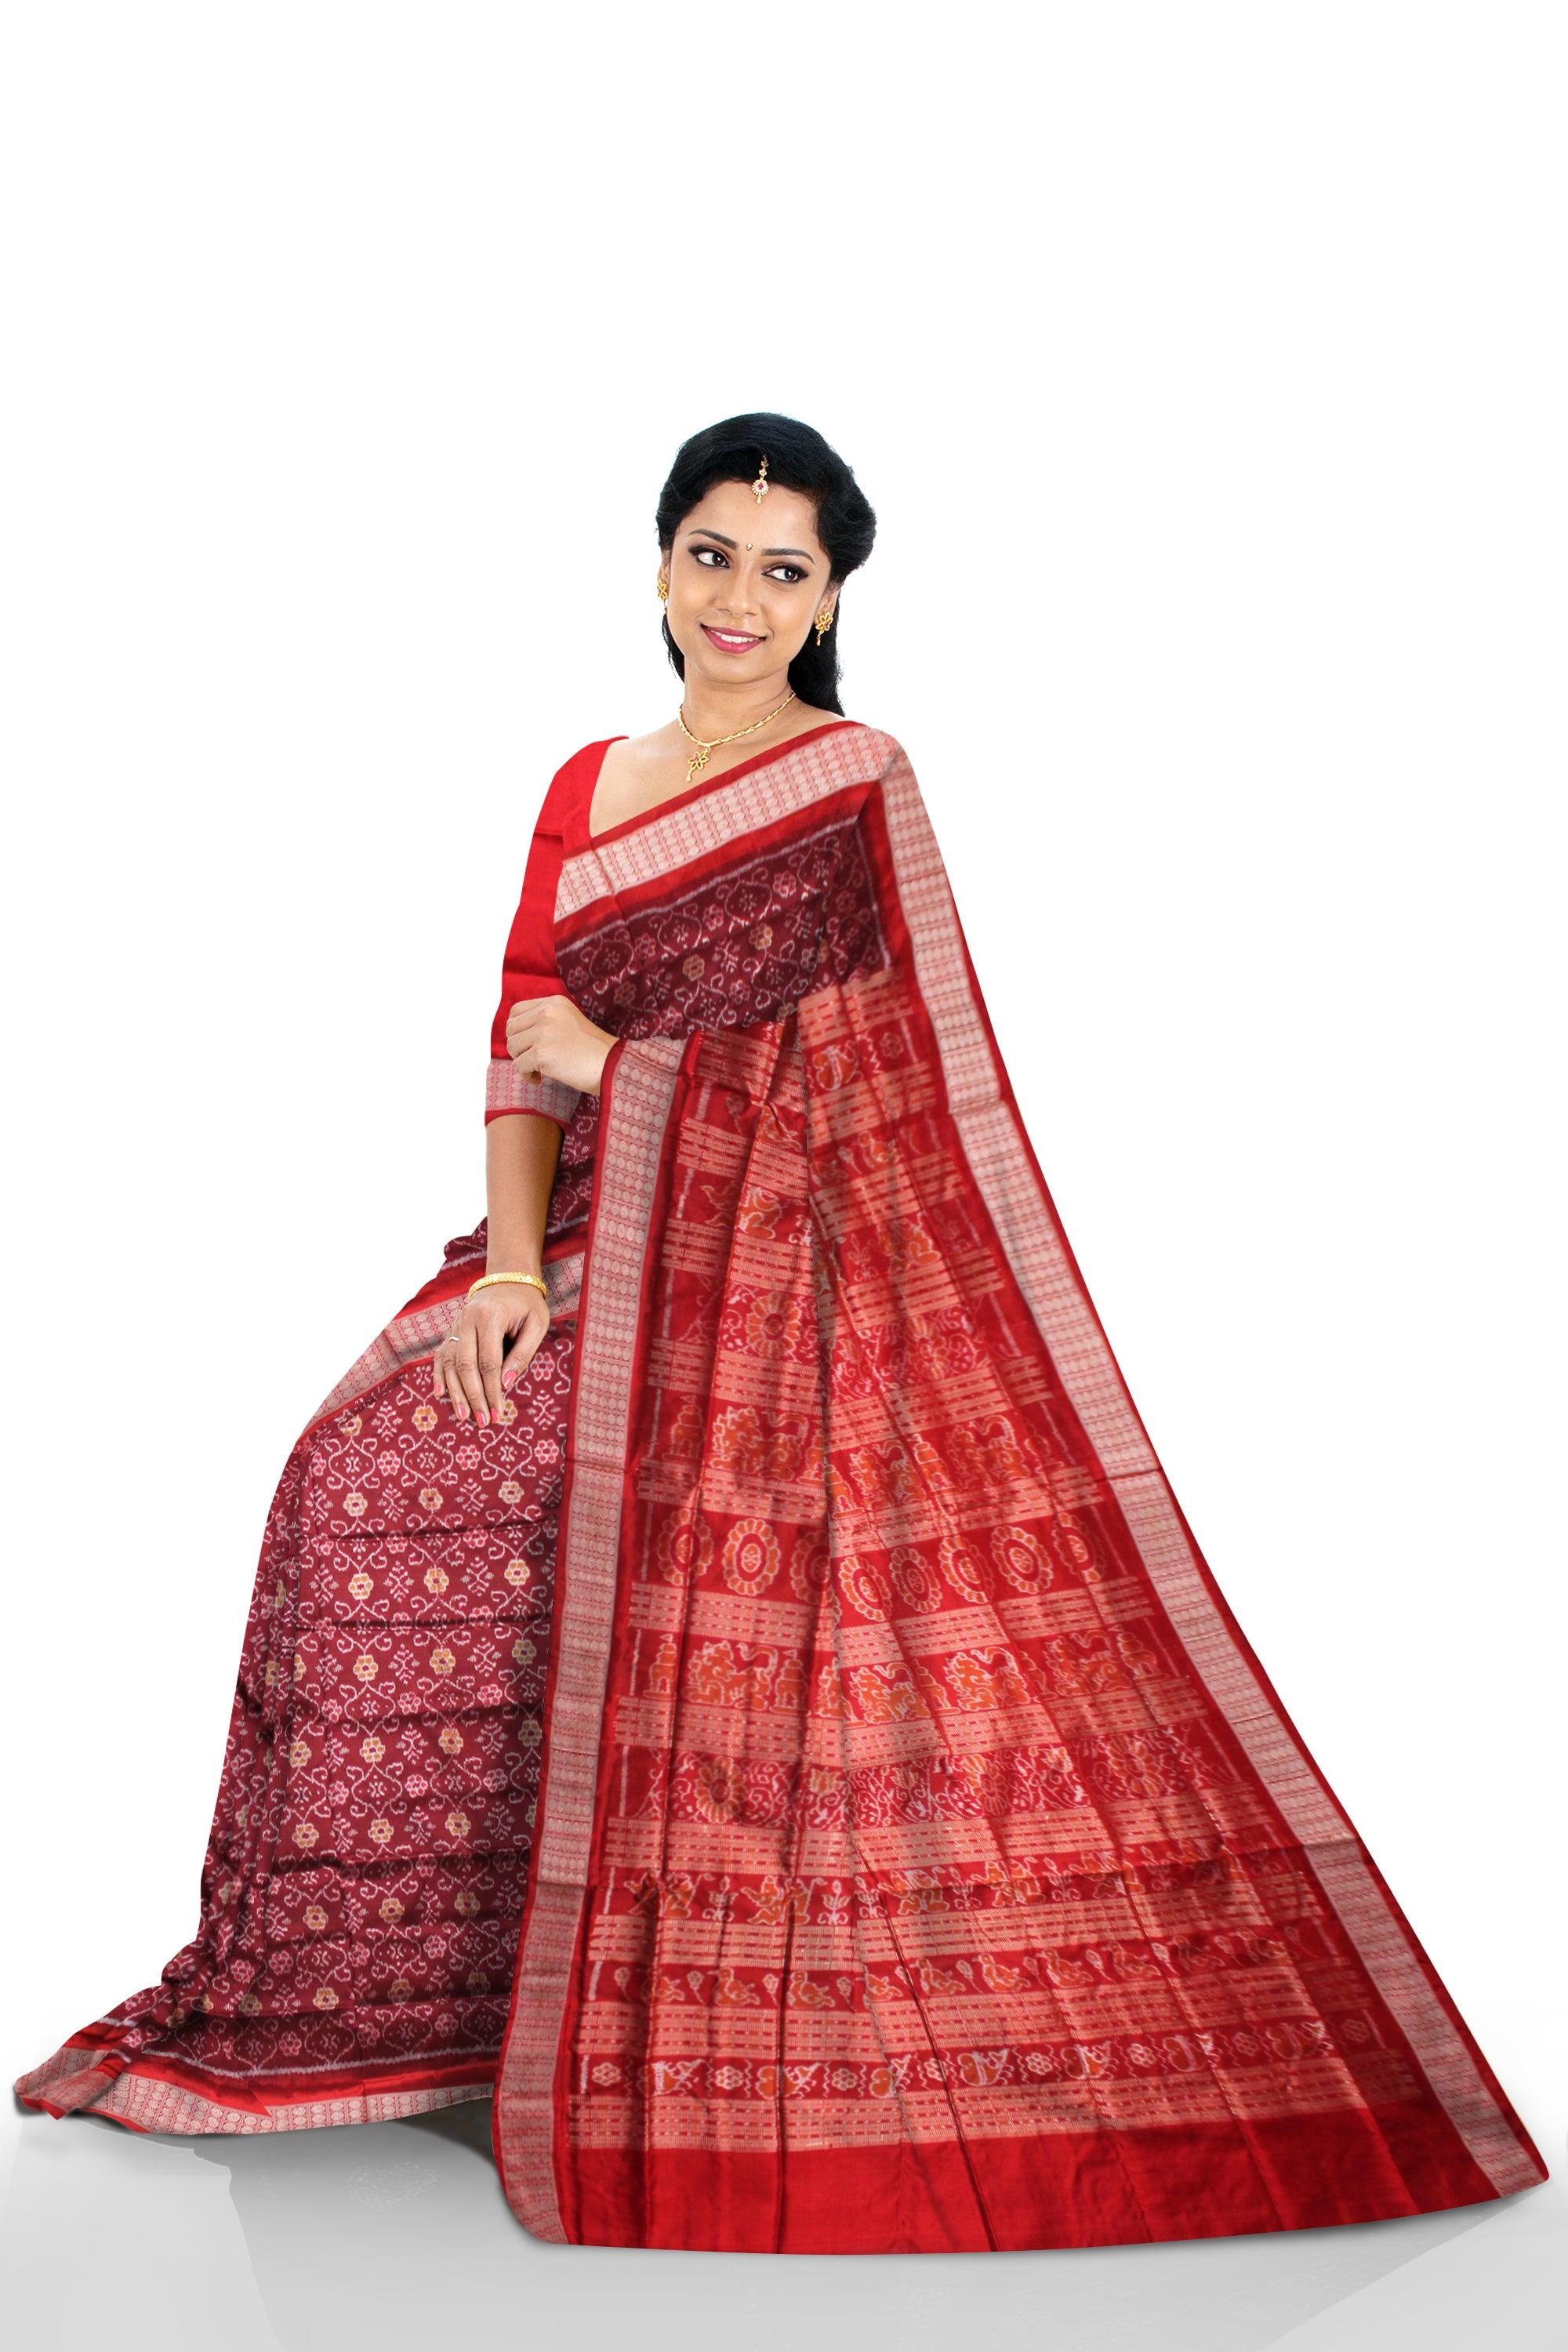 SONEPUR BANDHA PURE SILK SAREE IN CARMINE AND RED COLOR, WITH BLOUSE PIECE. - Koshali Arts & Crafts Enterprise